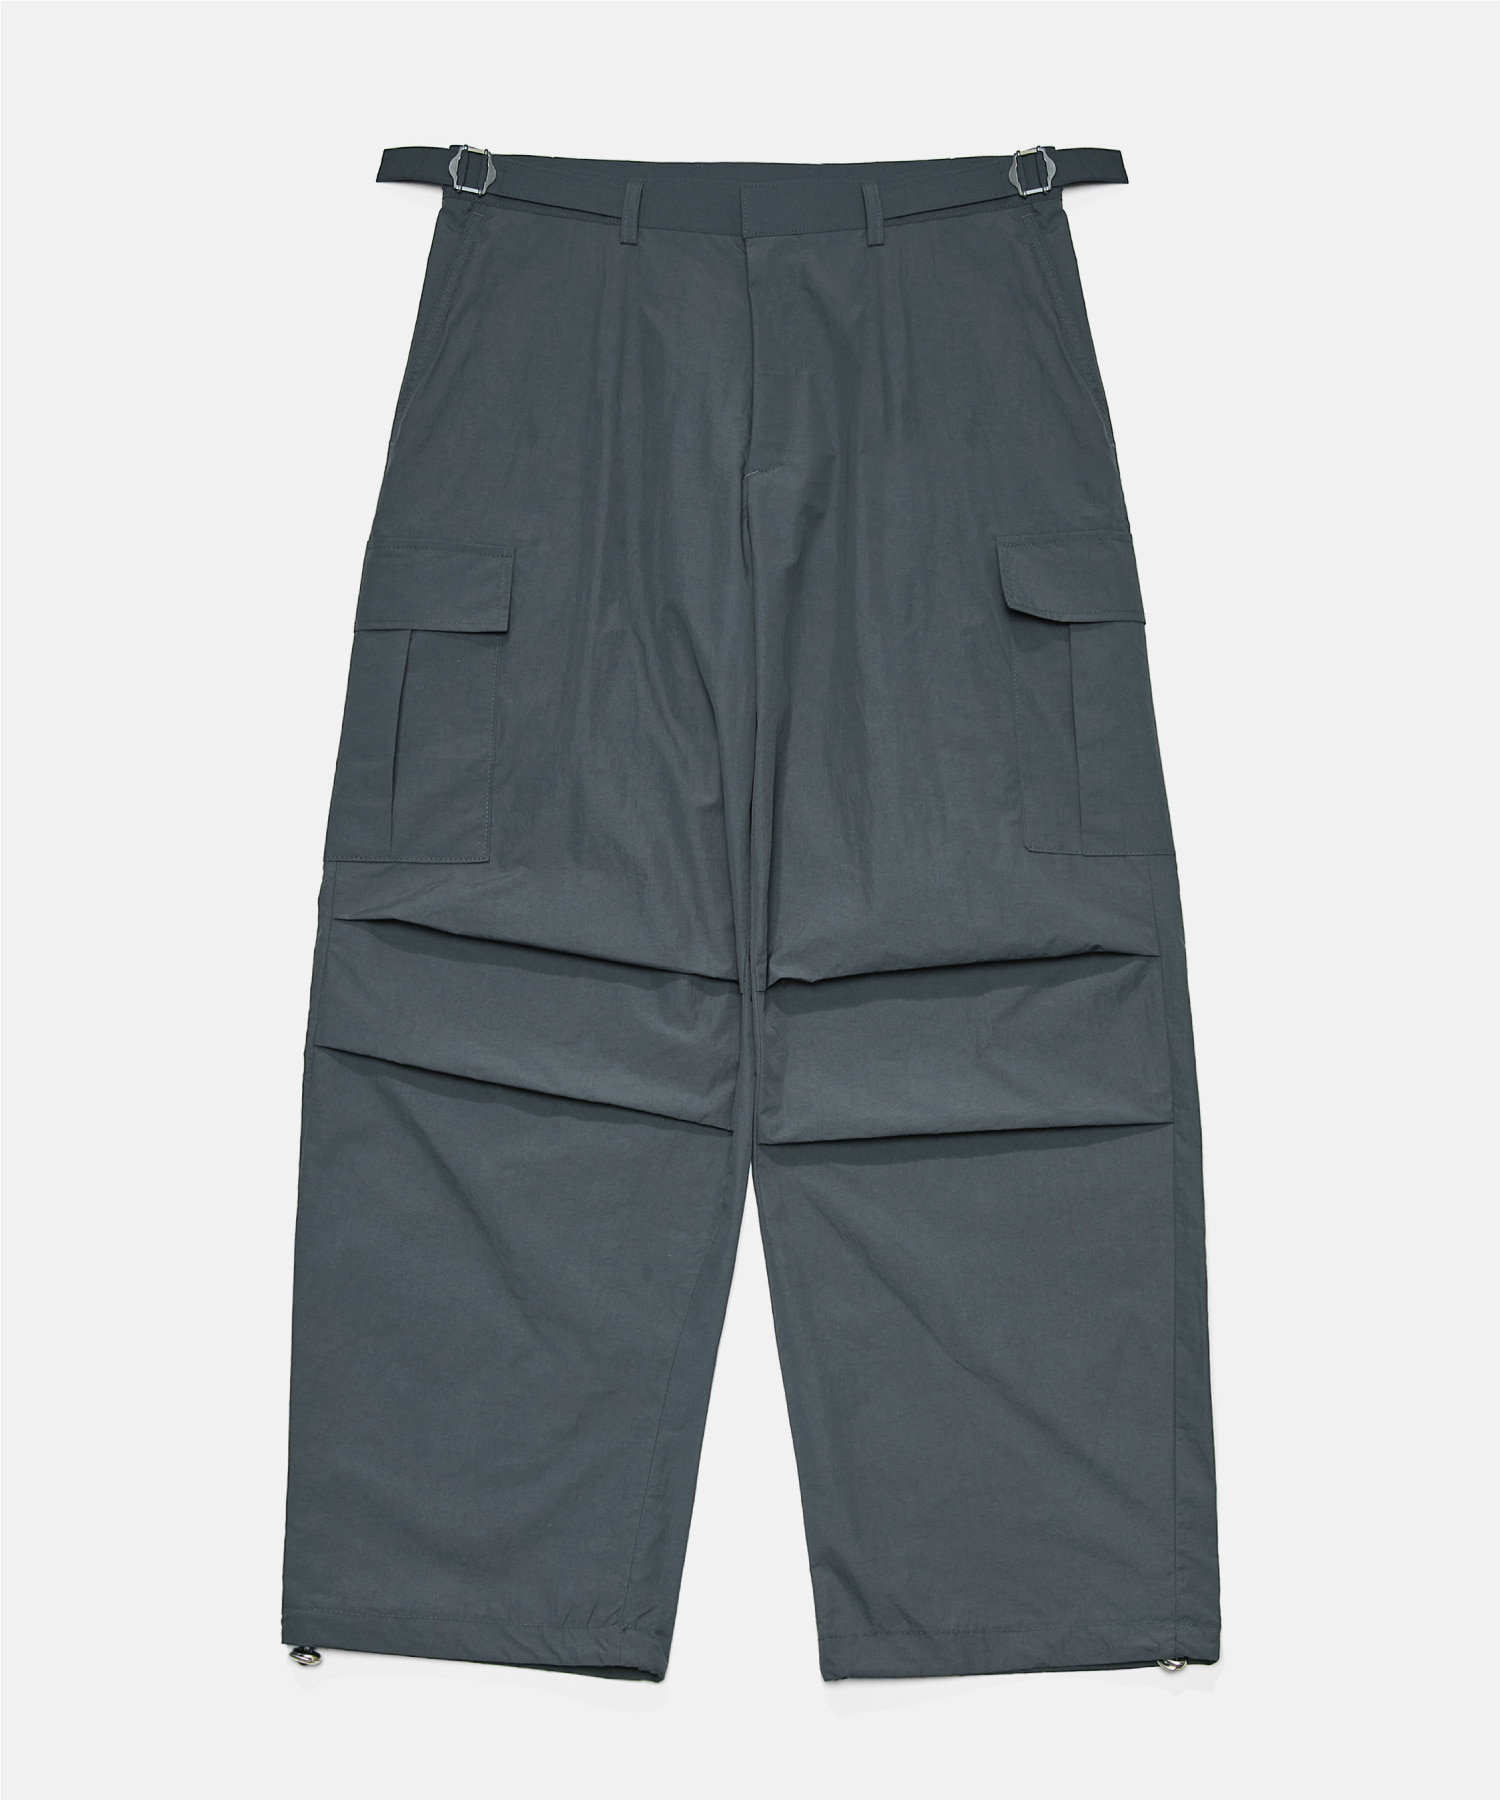 TY sports casual parachute pants_Charcoal